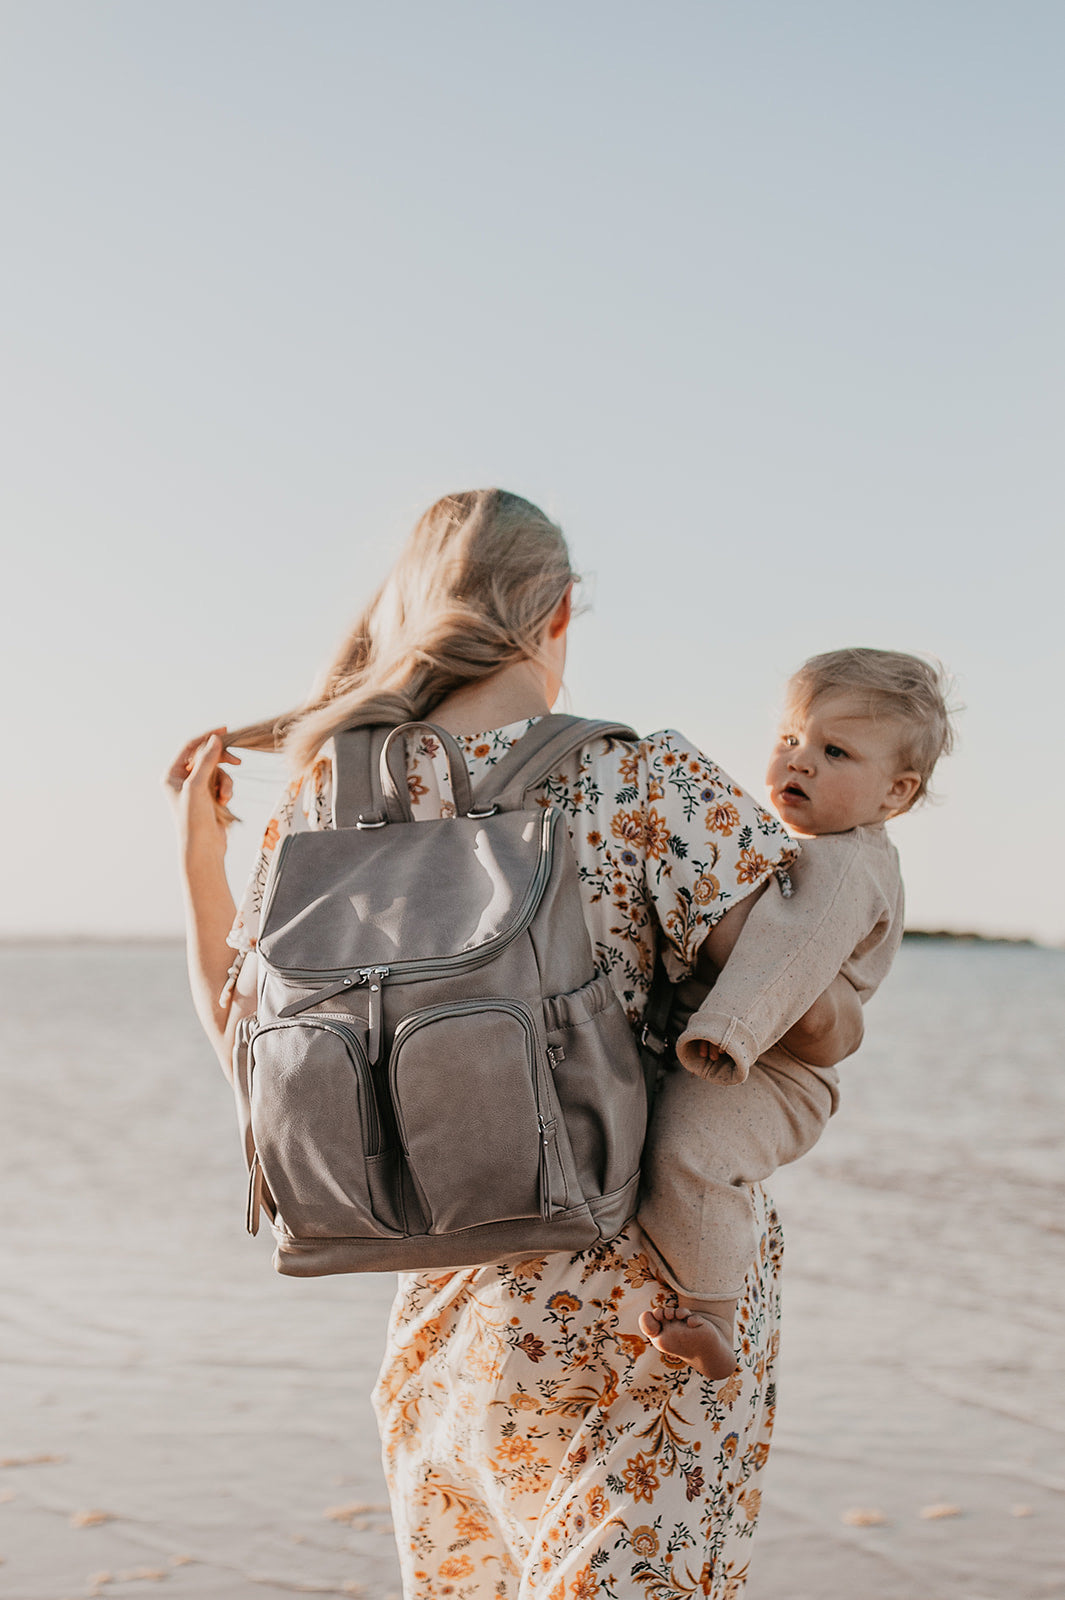 OiOi Vegan Leather Nappy Backpack Taupe